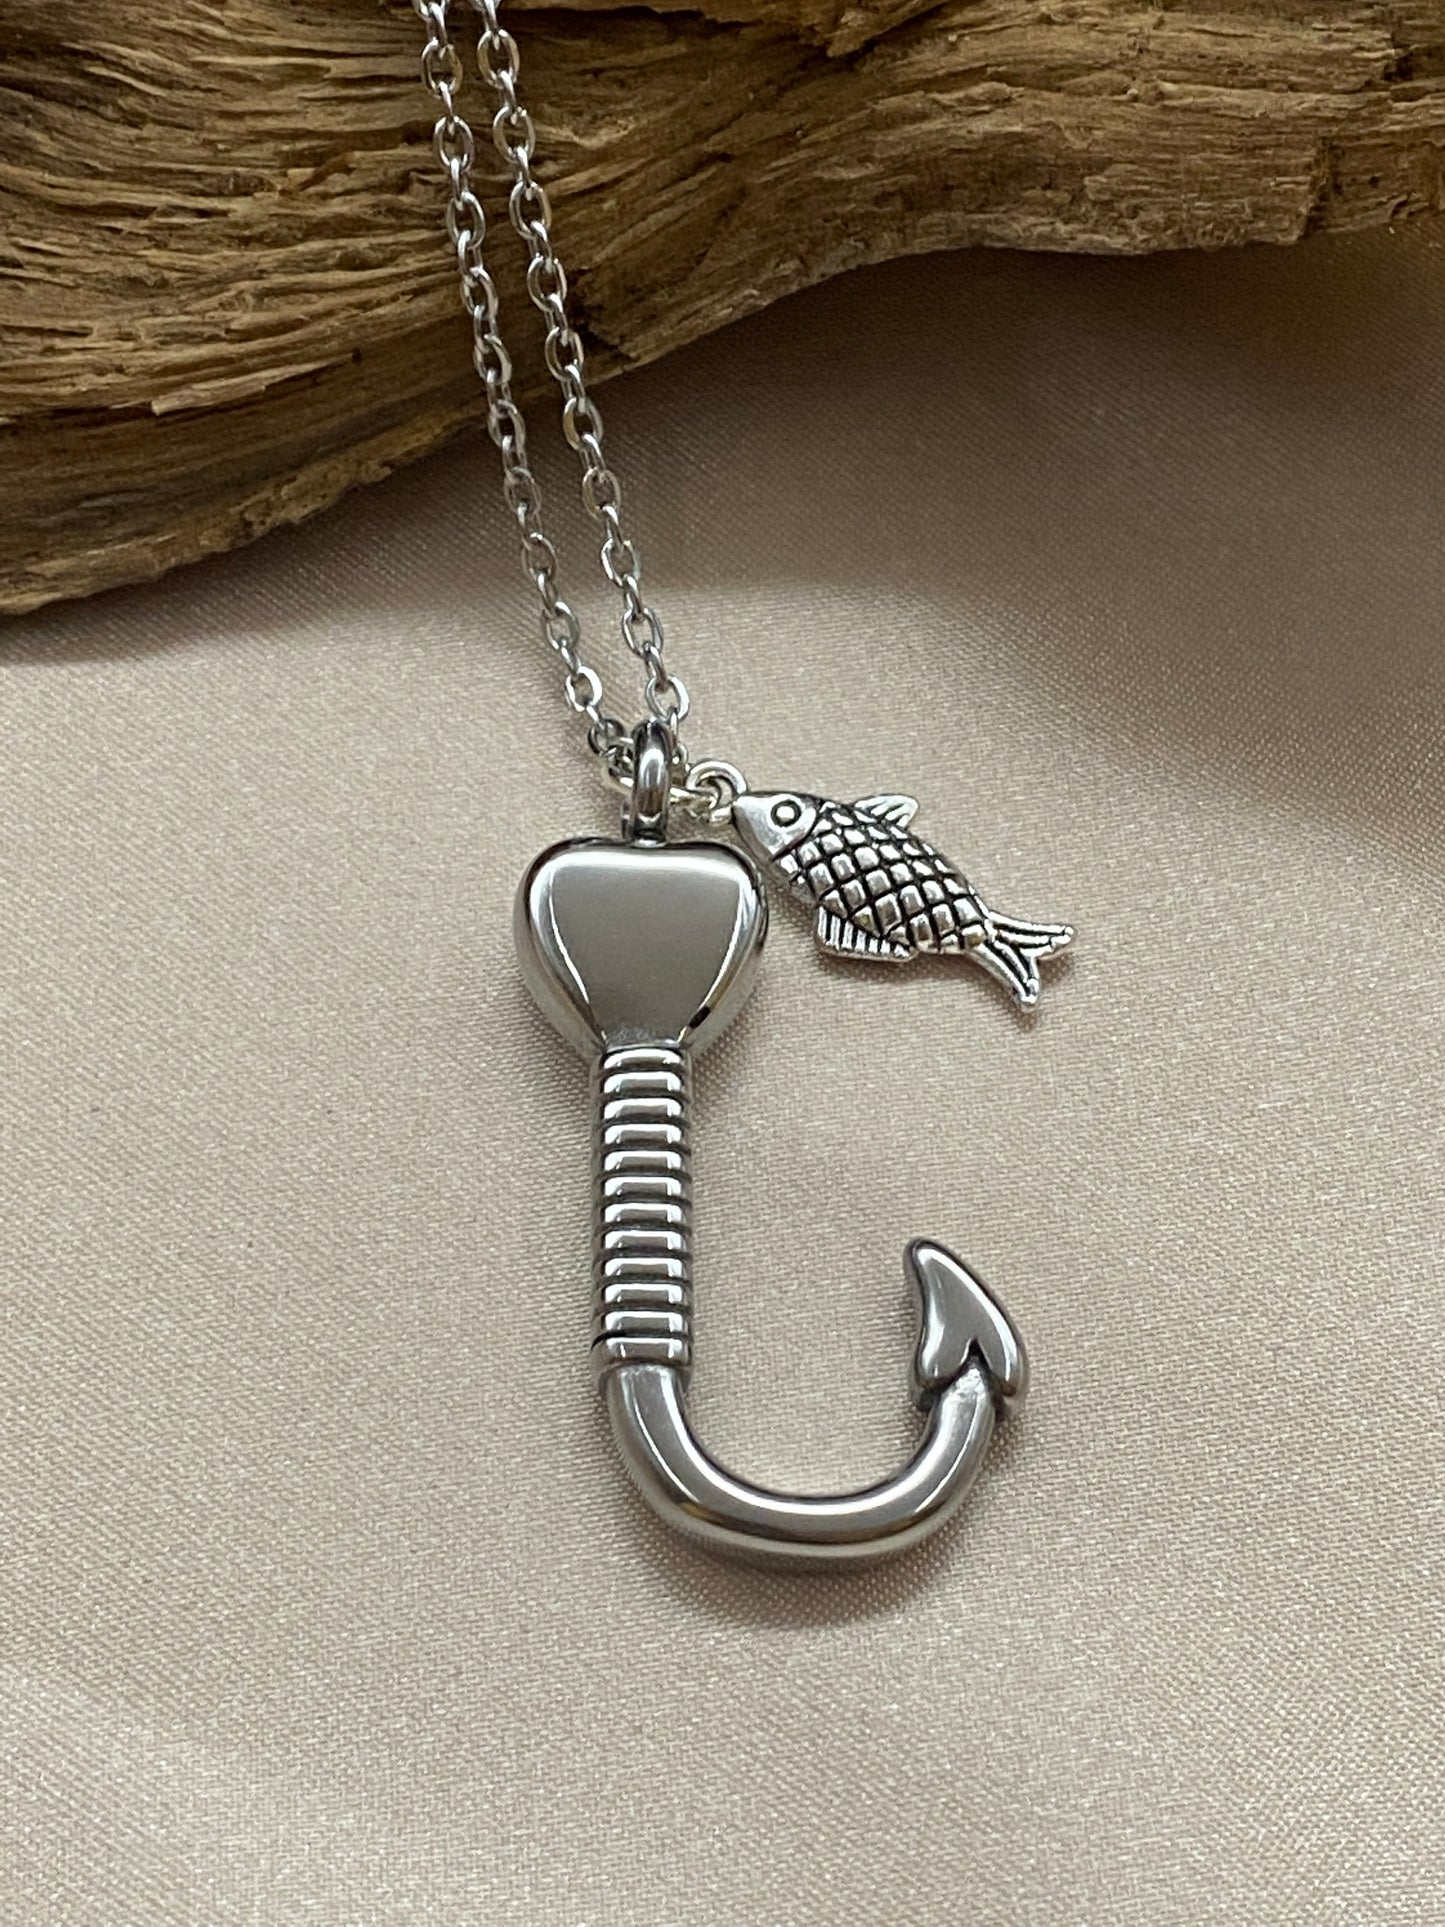 Fish Hook Urn Necklace with Silver Fish Charm - Cremation Pendant